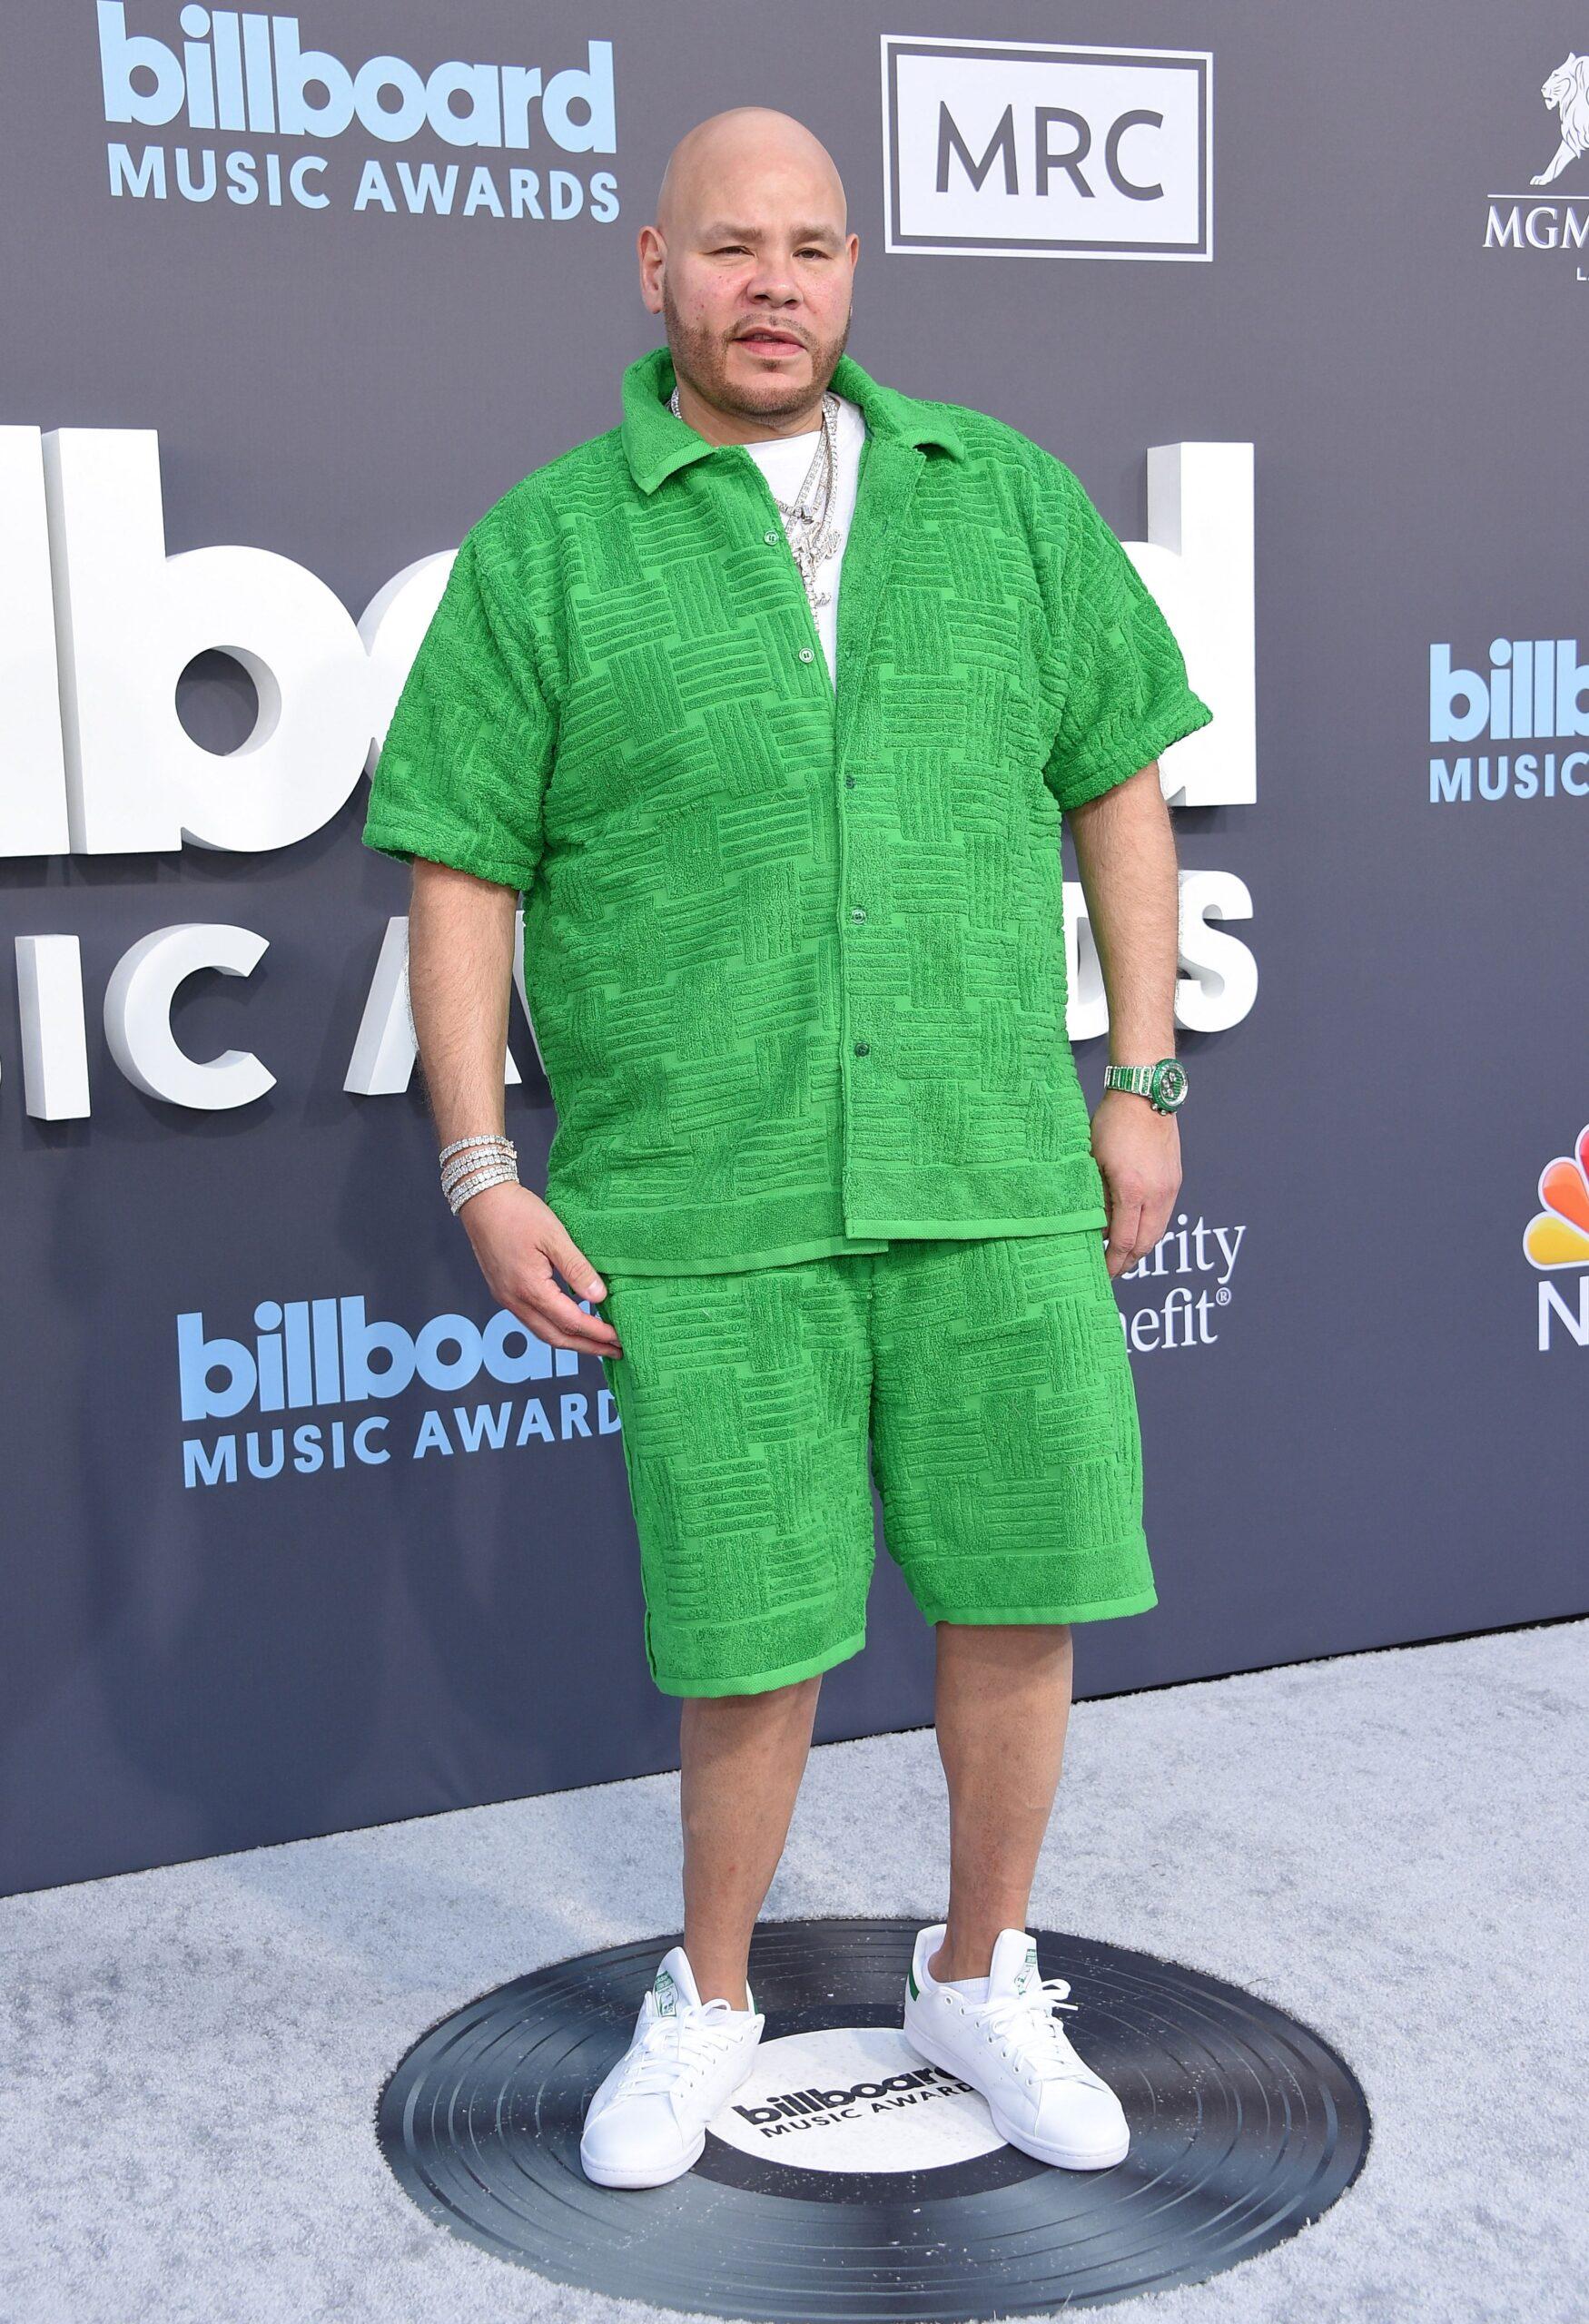 Fat Joe Opens Up About His INCREDIBLE 200 Pounds Weight Loss Journey: 'I Really Want To Be Healthy' 